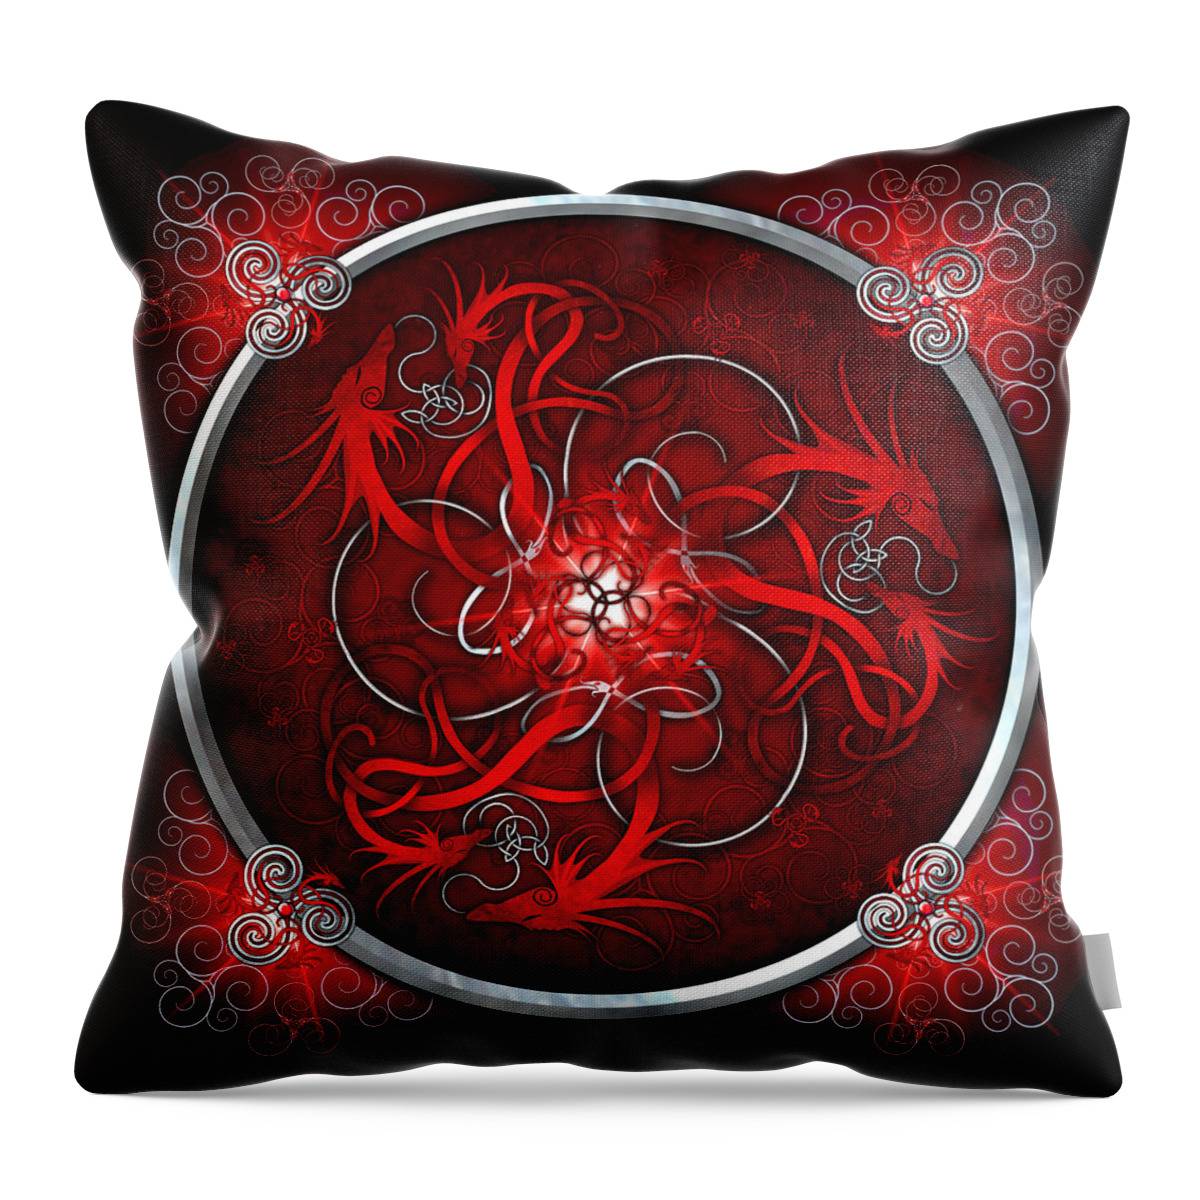 Dragon Throw Pillow featuring the photograph Celtic Dragons - Red by Ricky Barnes